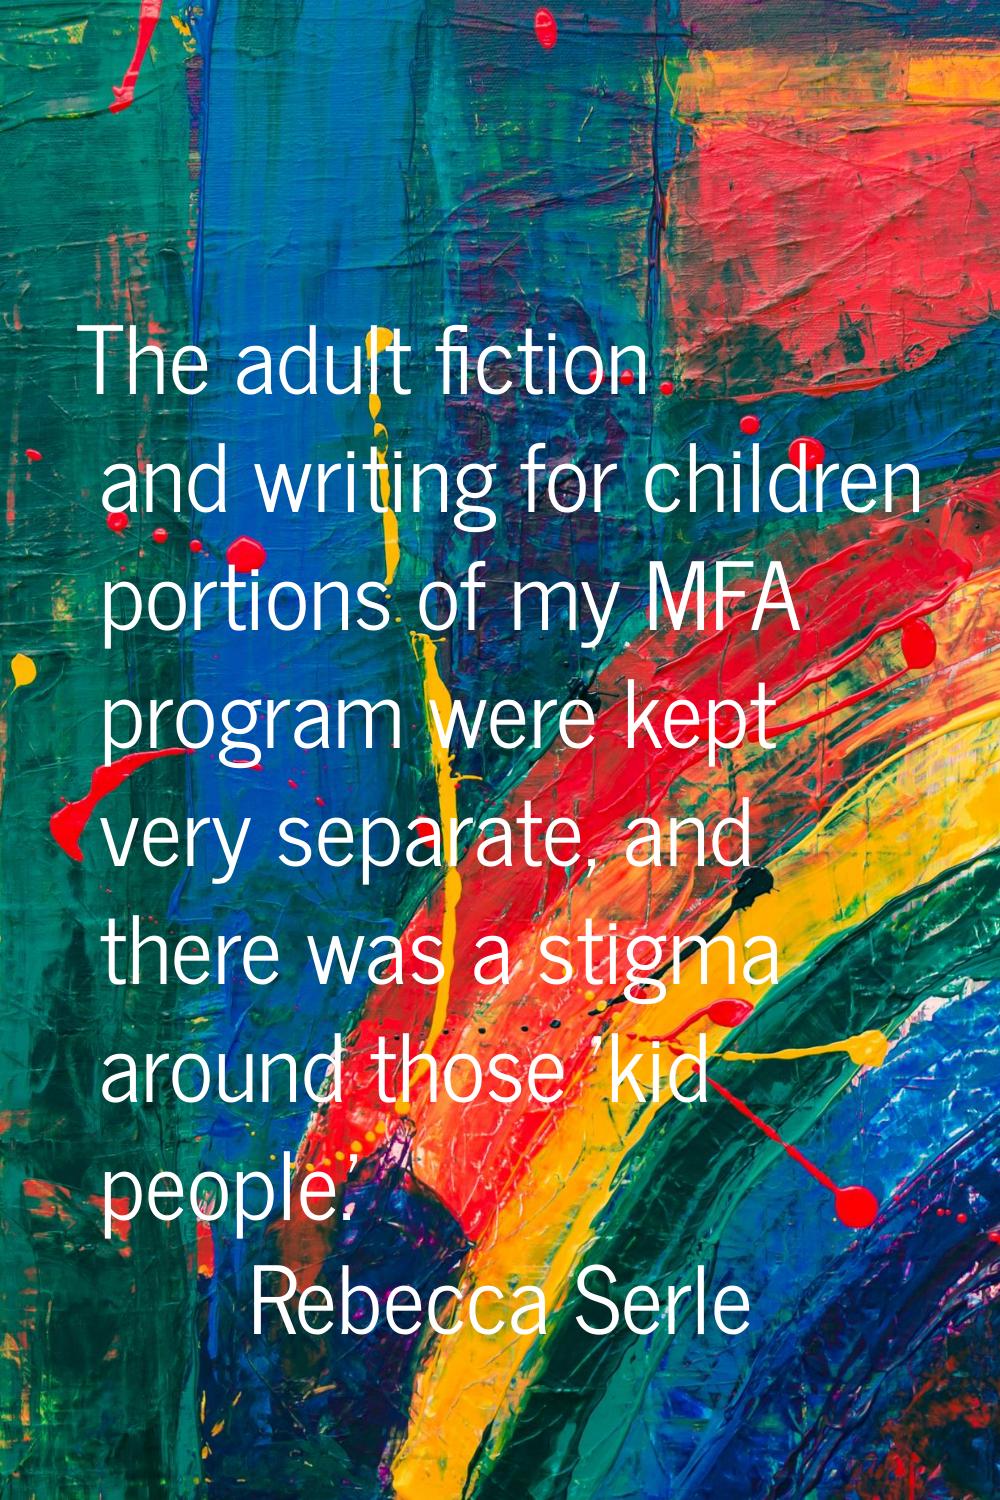 The adult fiction and writing for children portions of my MFA program were kept very separate, and 